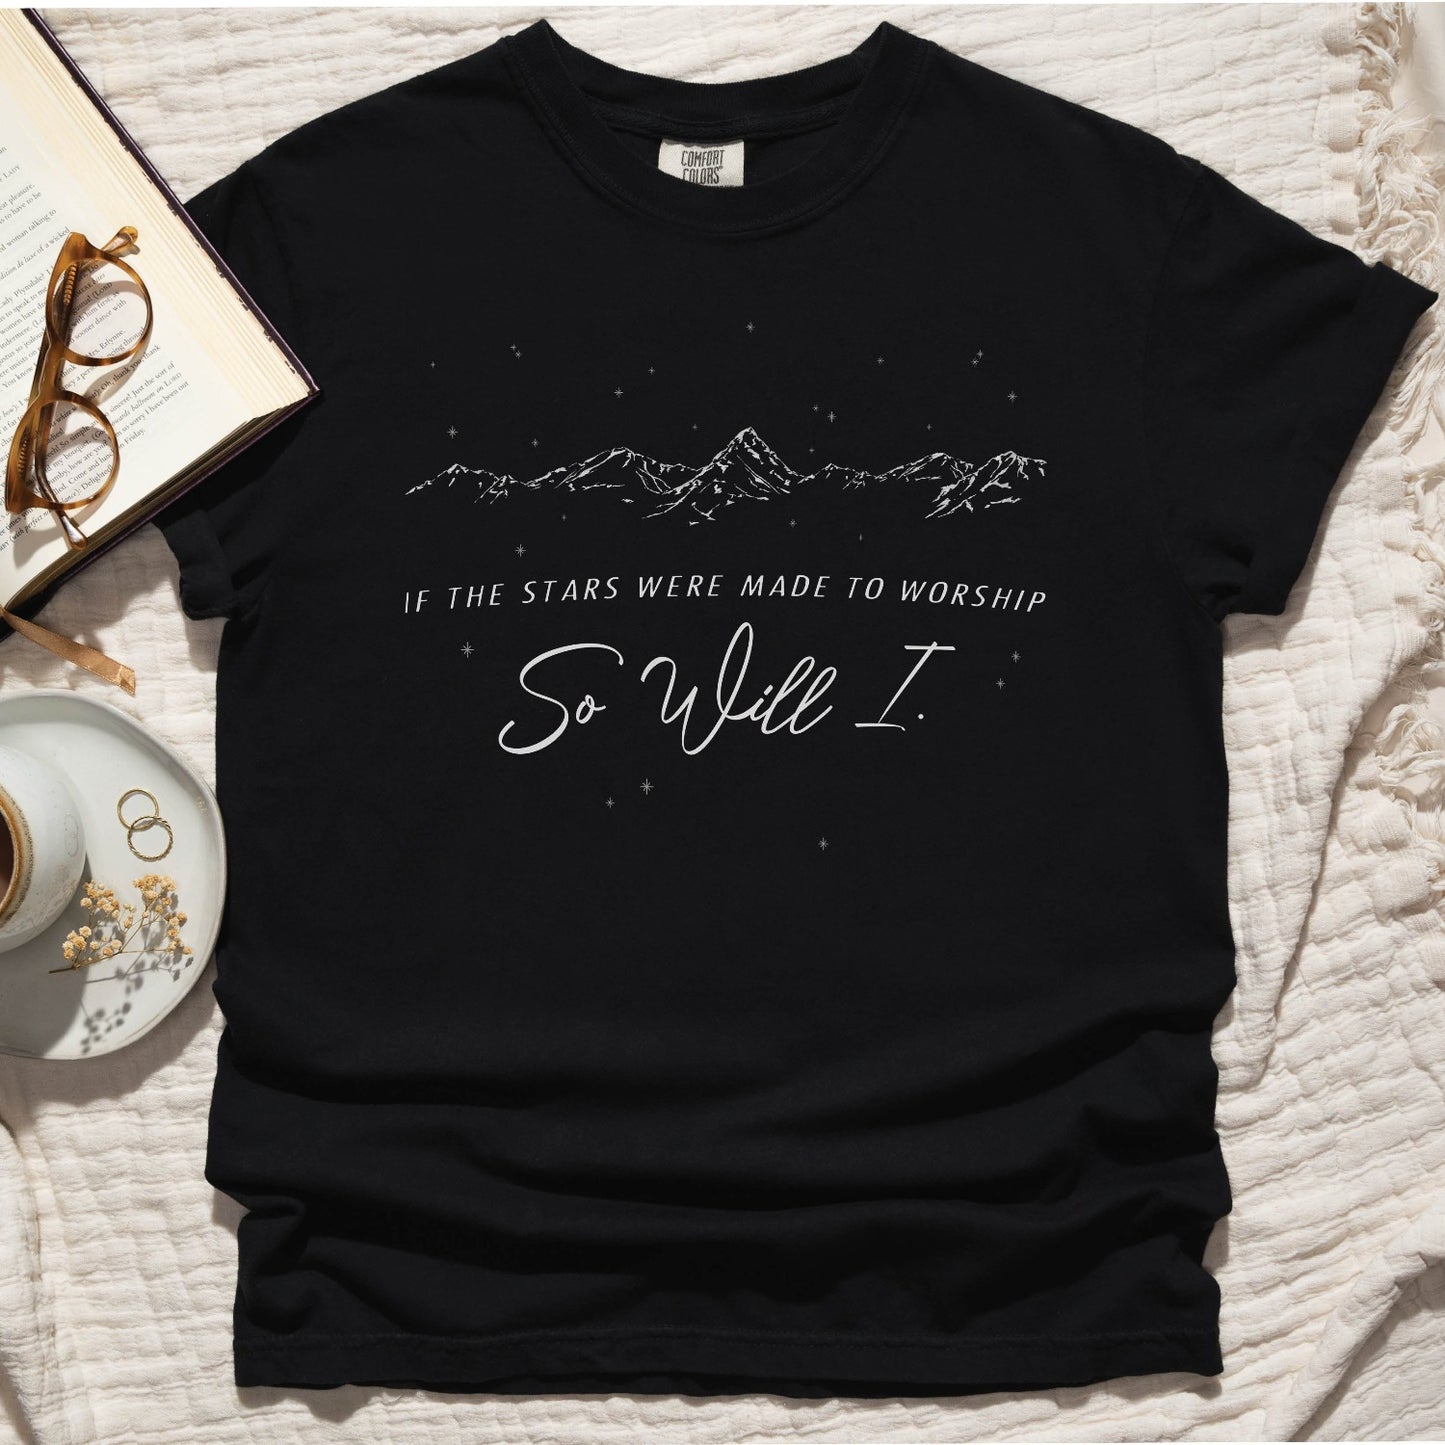 Black color garment-dyed unisex Comfort Colors 1717 t-shirt with white hand-drawn mountain range and starry sky that says this faith-based bible verse quote, "If the Stars Were Made to Worship So Will I", created for Christian men and women Kingdom believers